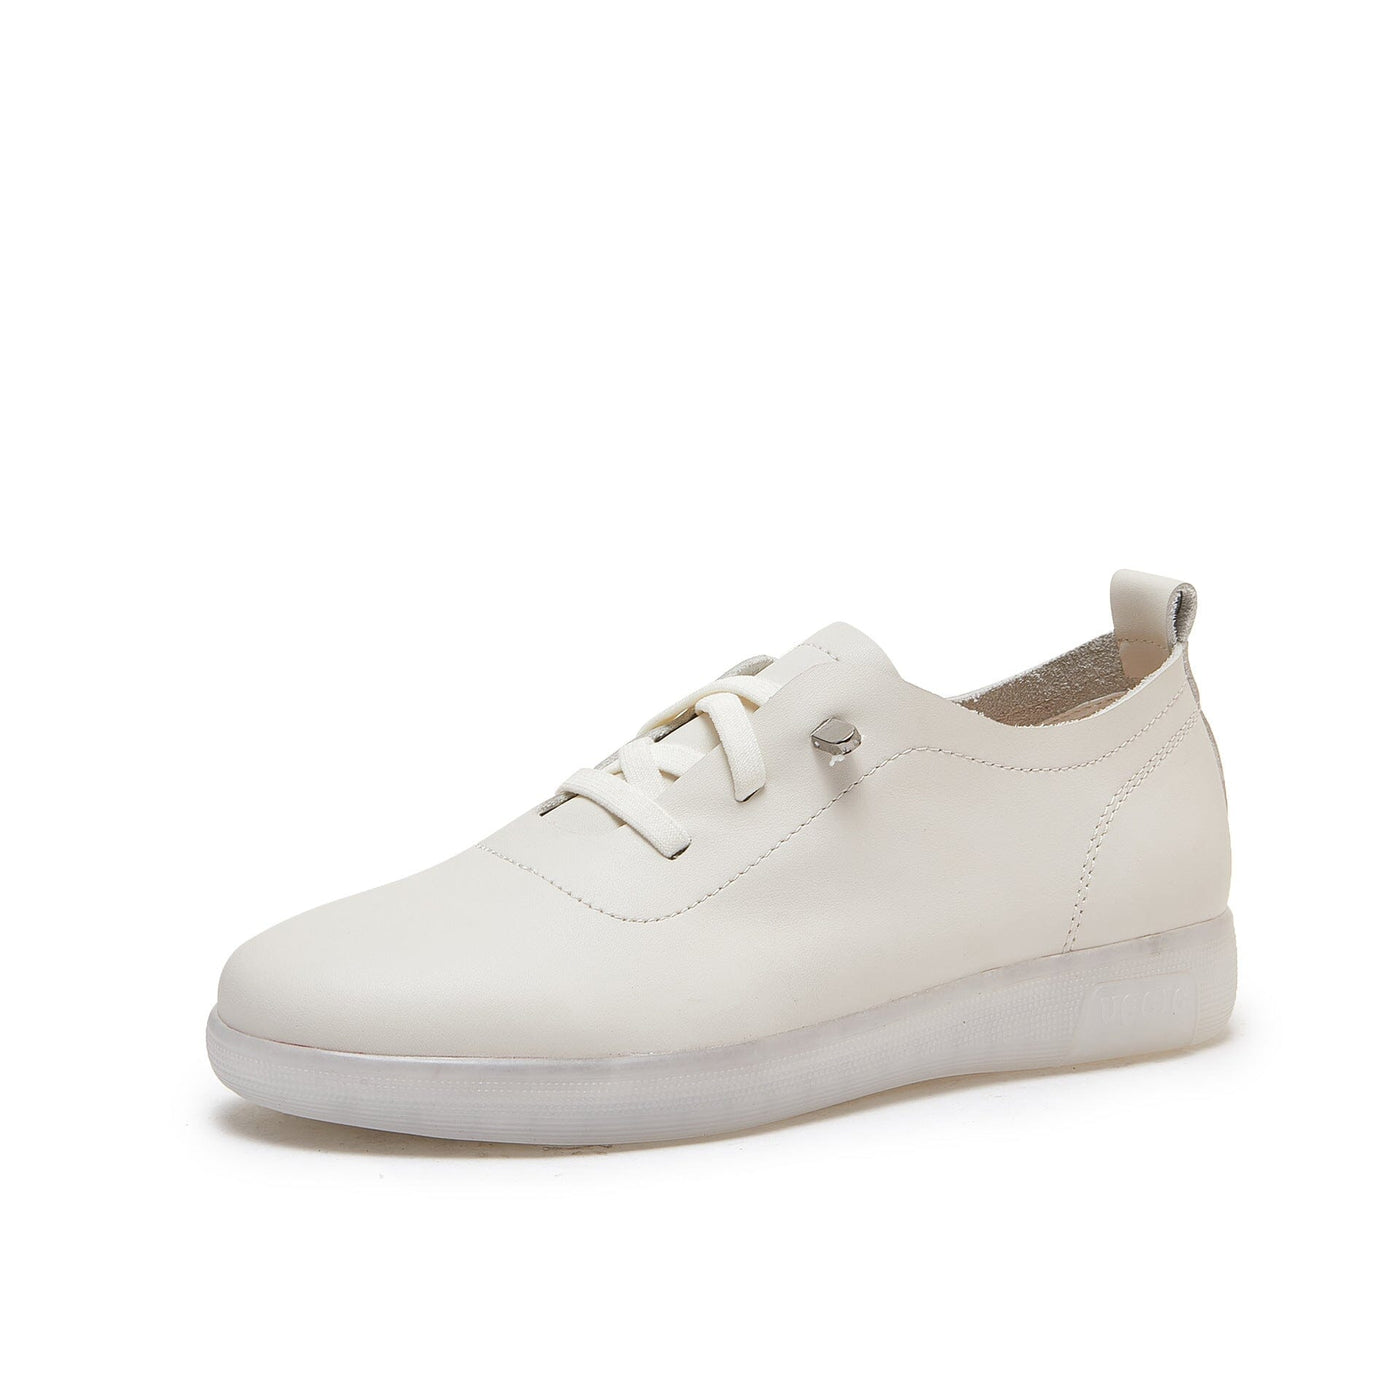 Spring Minimalist Leather Soft Flat Casual Shoes